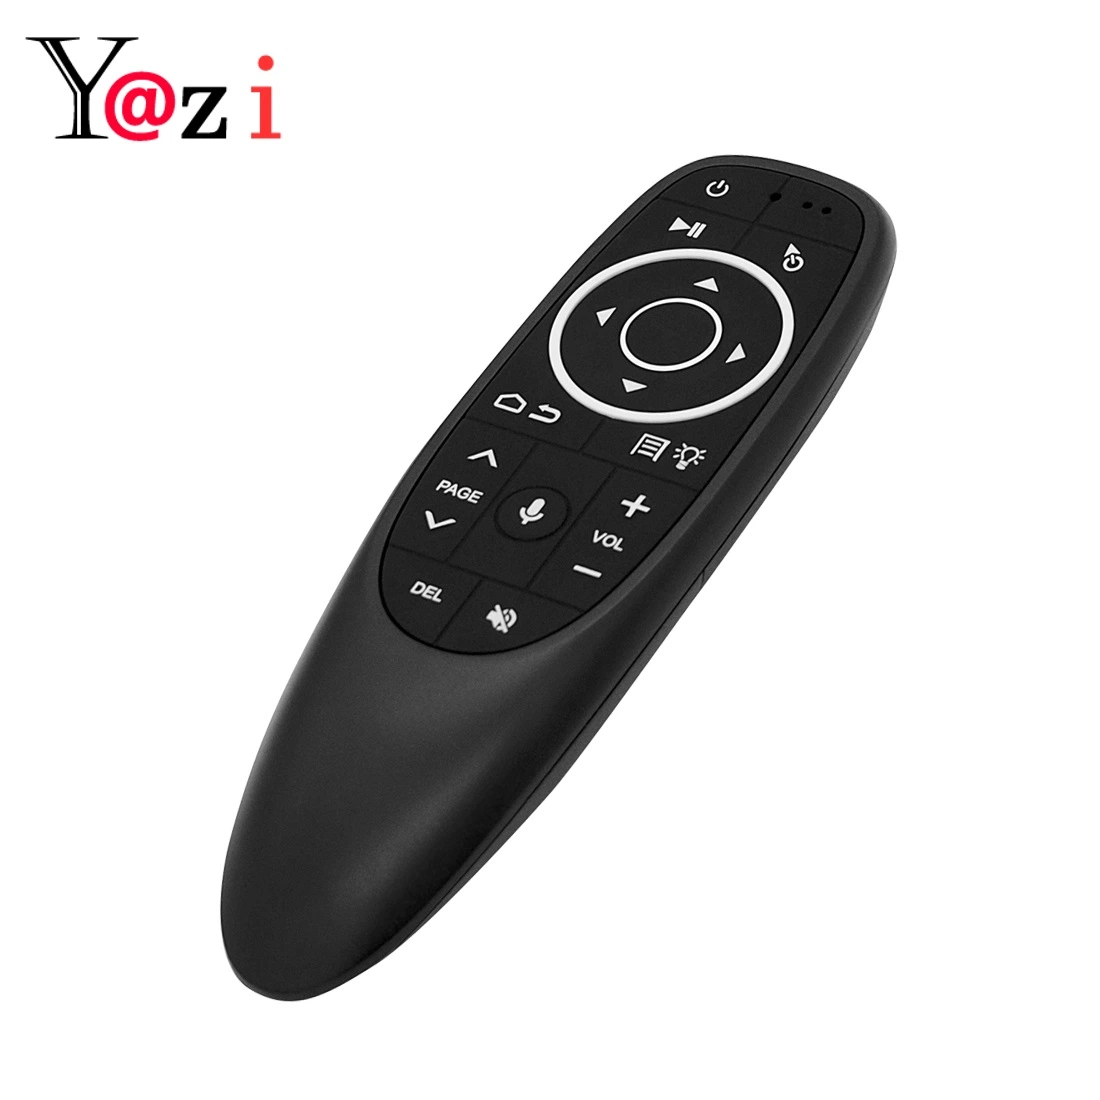 G10 G10s PRO with Gyroscope Cheapest Voice Air Mouse G10s PRO 2.4GHz Wireless Remote Control Backlit